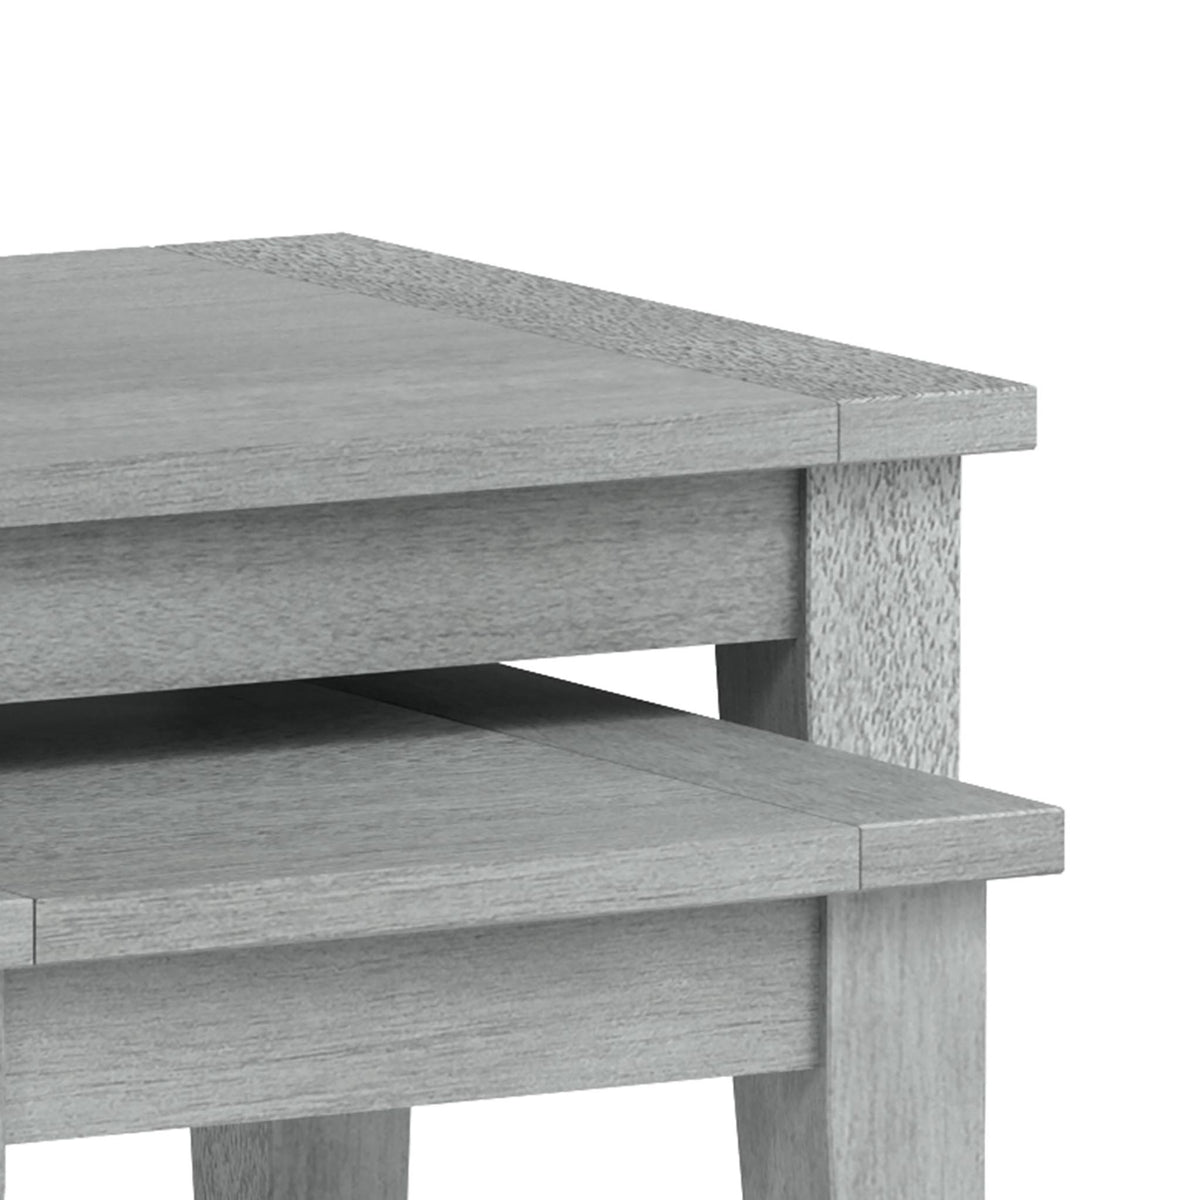 Elise Gris Grey Acacia Nest of Tables Set close up of table edge